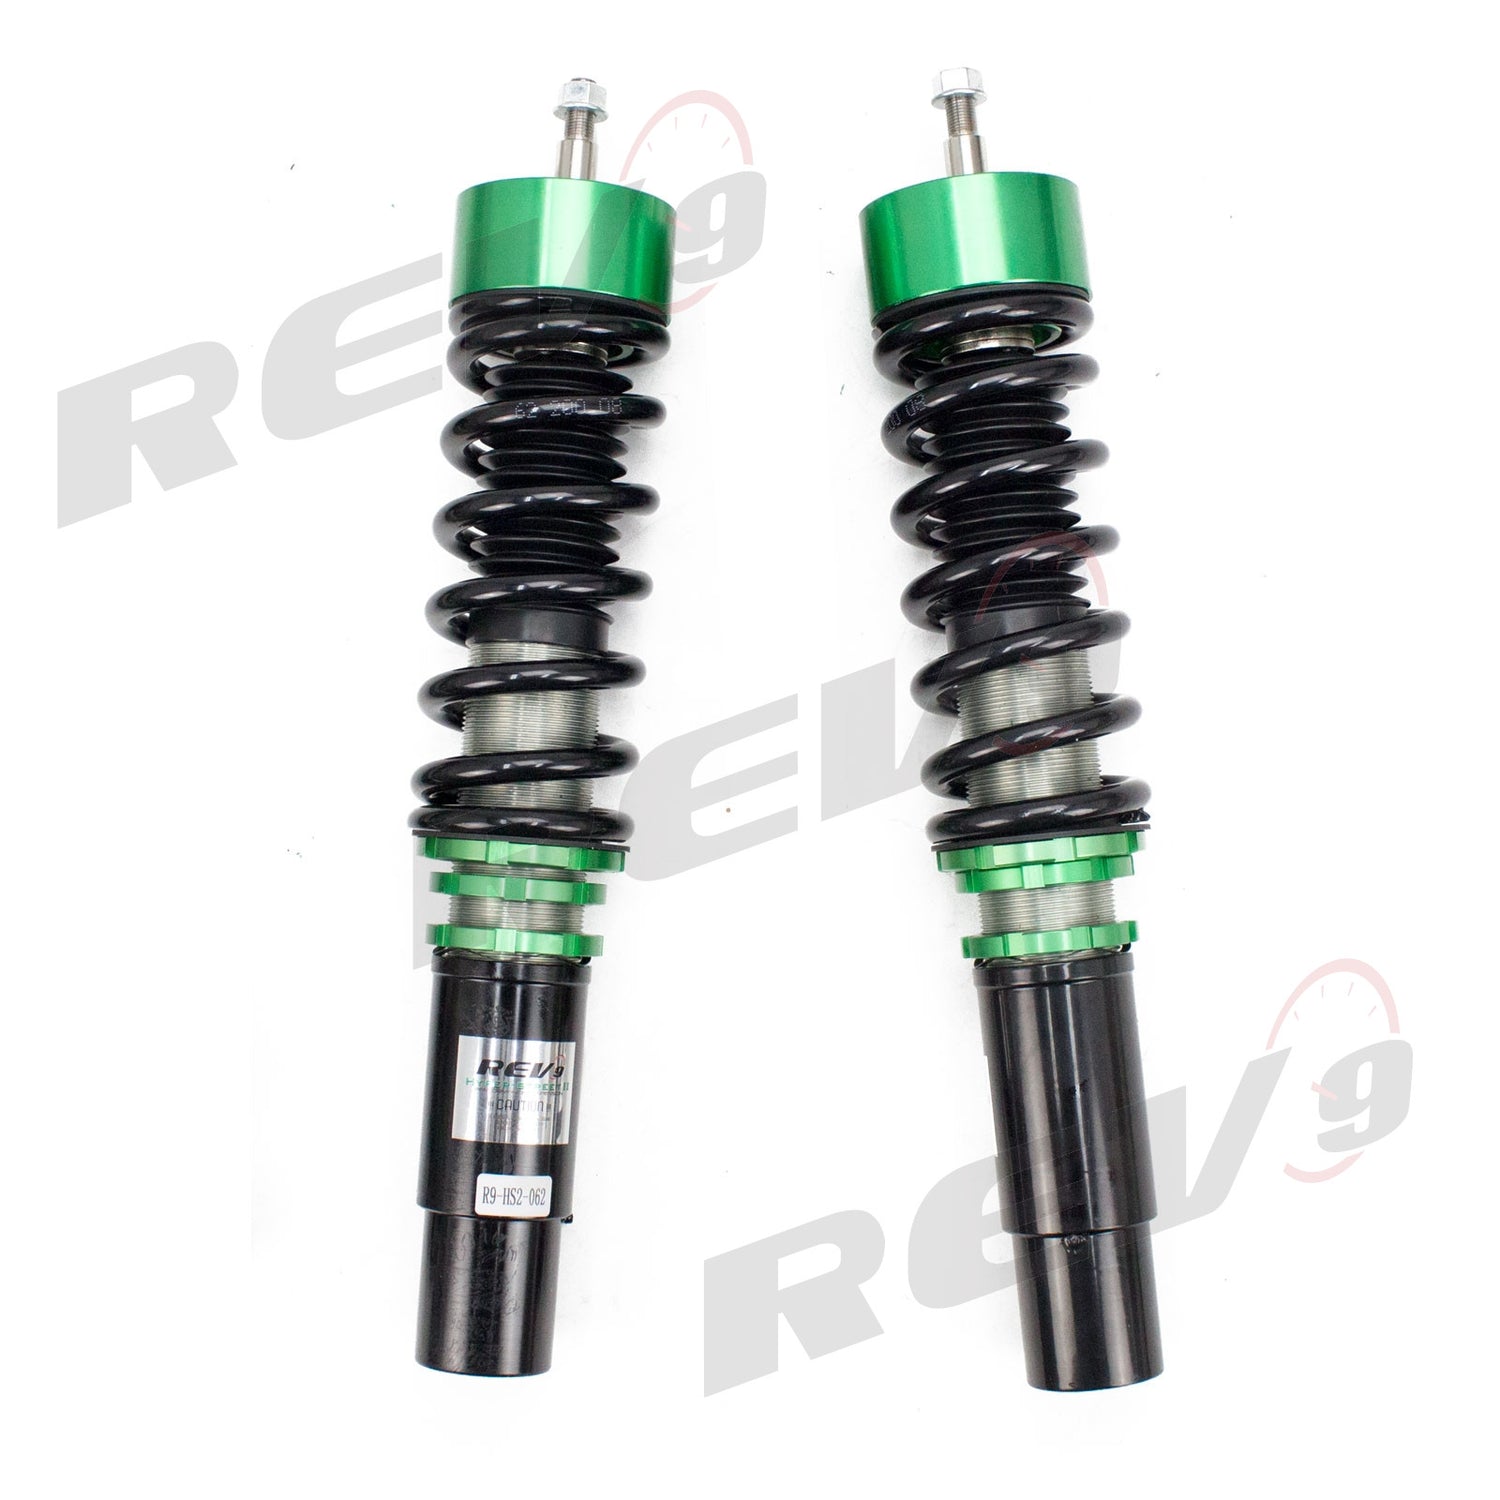 Rev9 Compatible With Audi S5/RS5 (8T) 2008-16 Hyper-Street II Coilover Kit w/ 32-Way Damping Force Adjustment